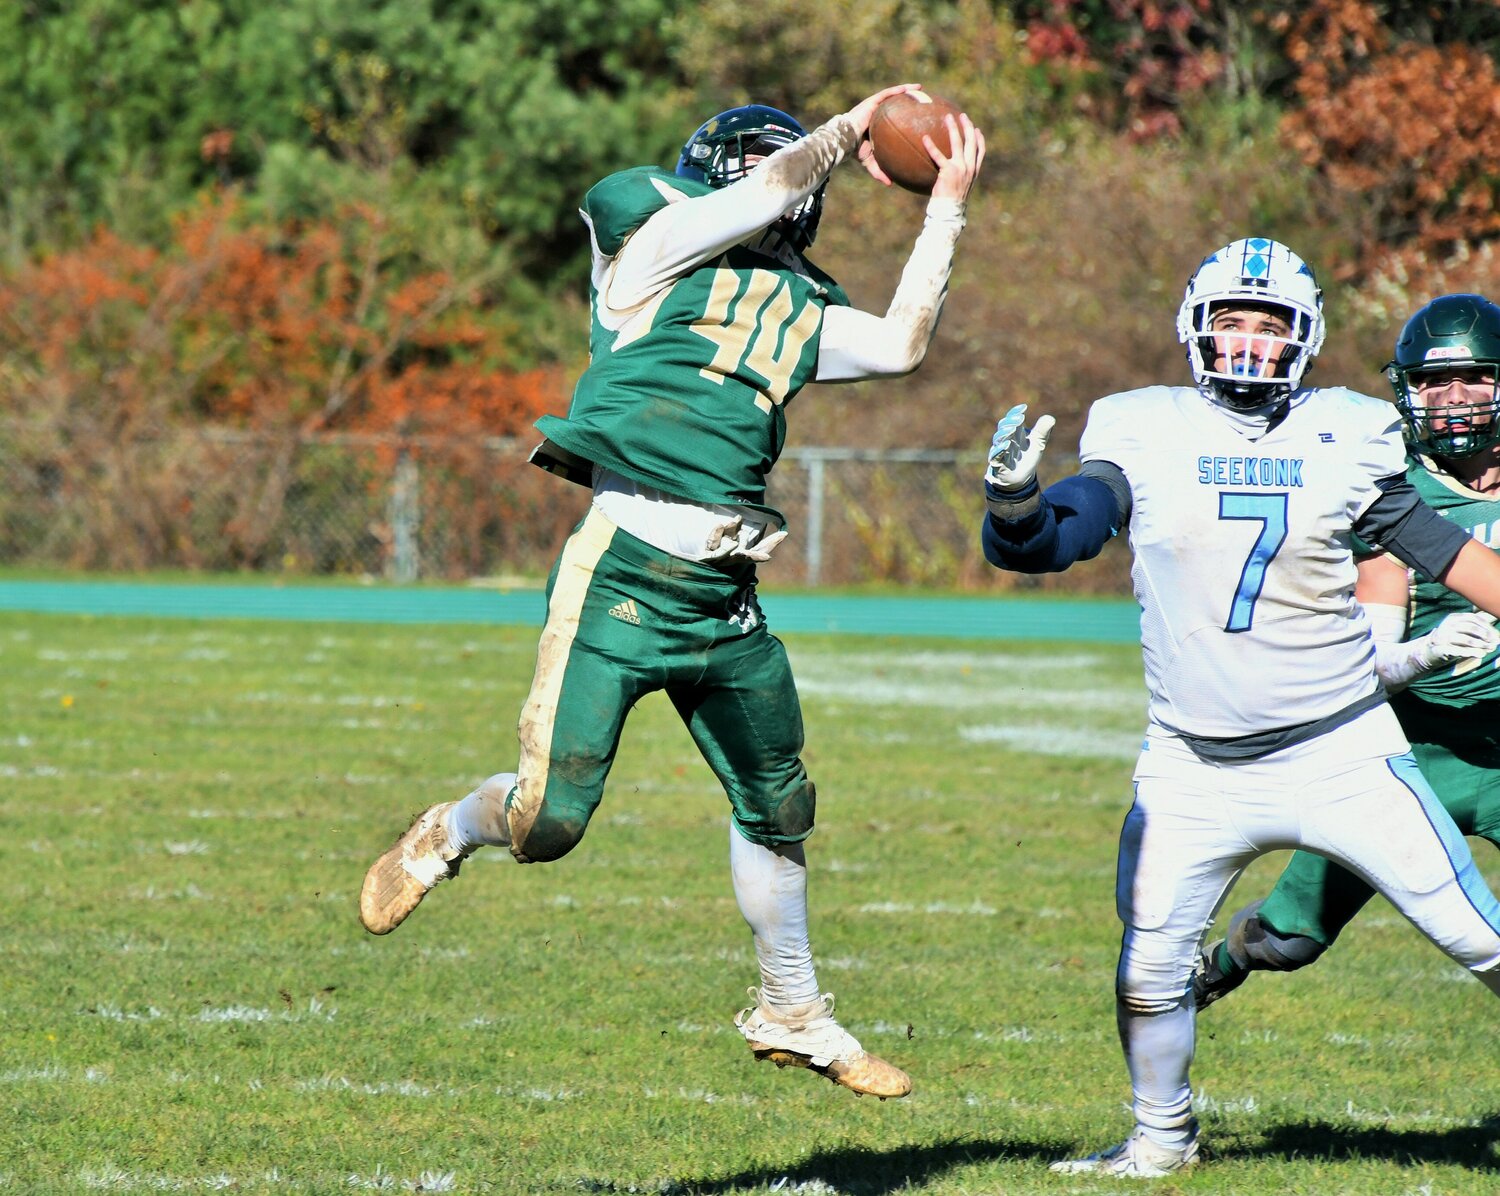 Kevin Gousie Jr. of Dighton Rehoboth cuts in front of Seekonk's Joey Nolan for an interception that he returned for a touchdown.